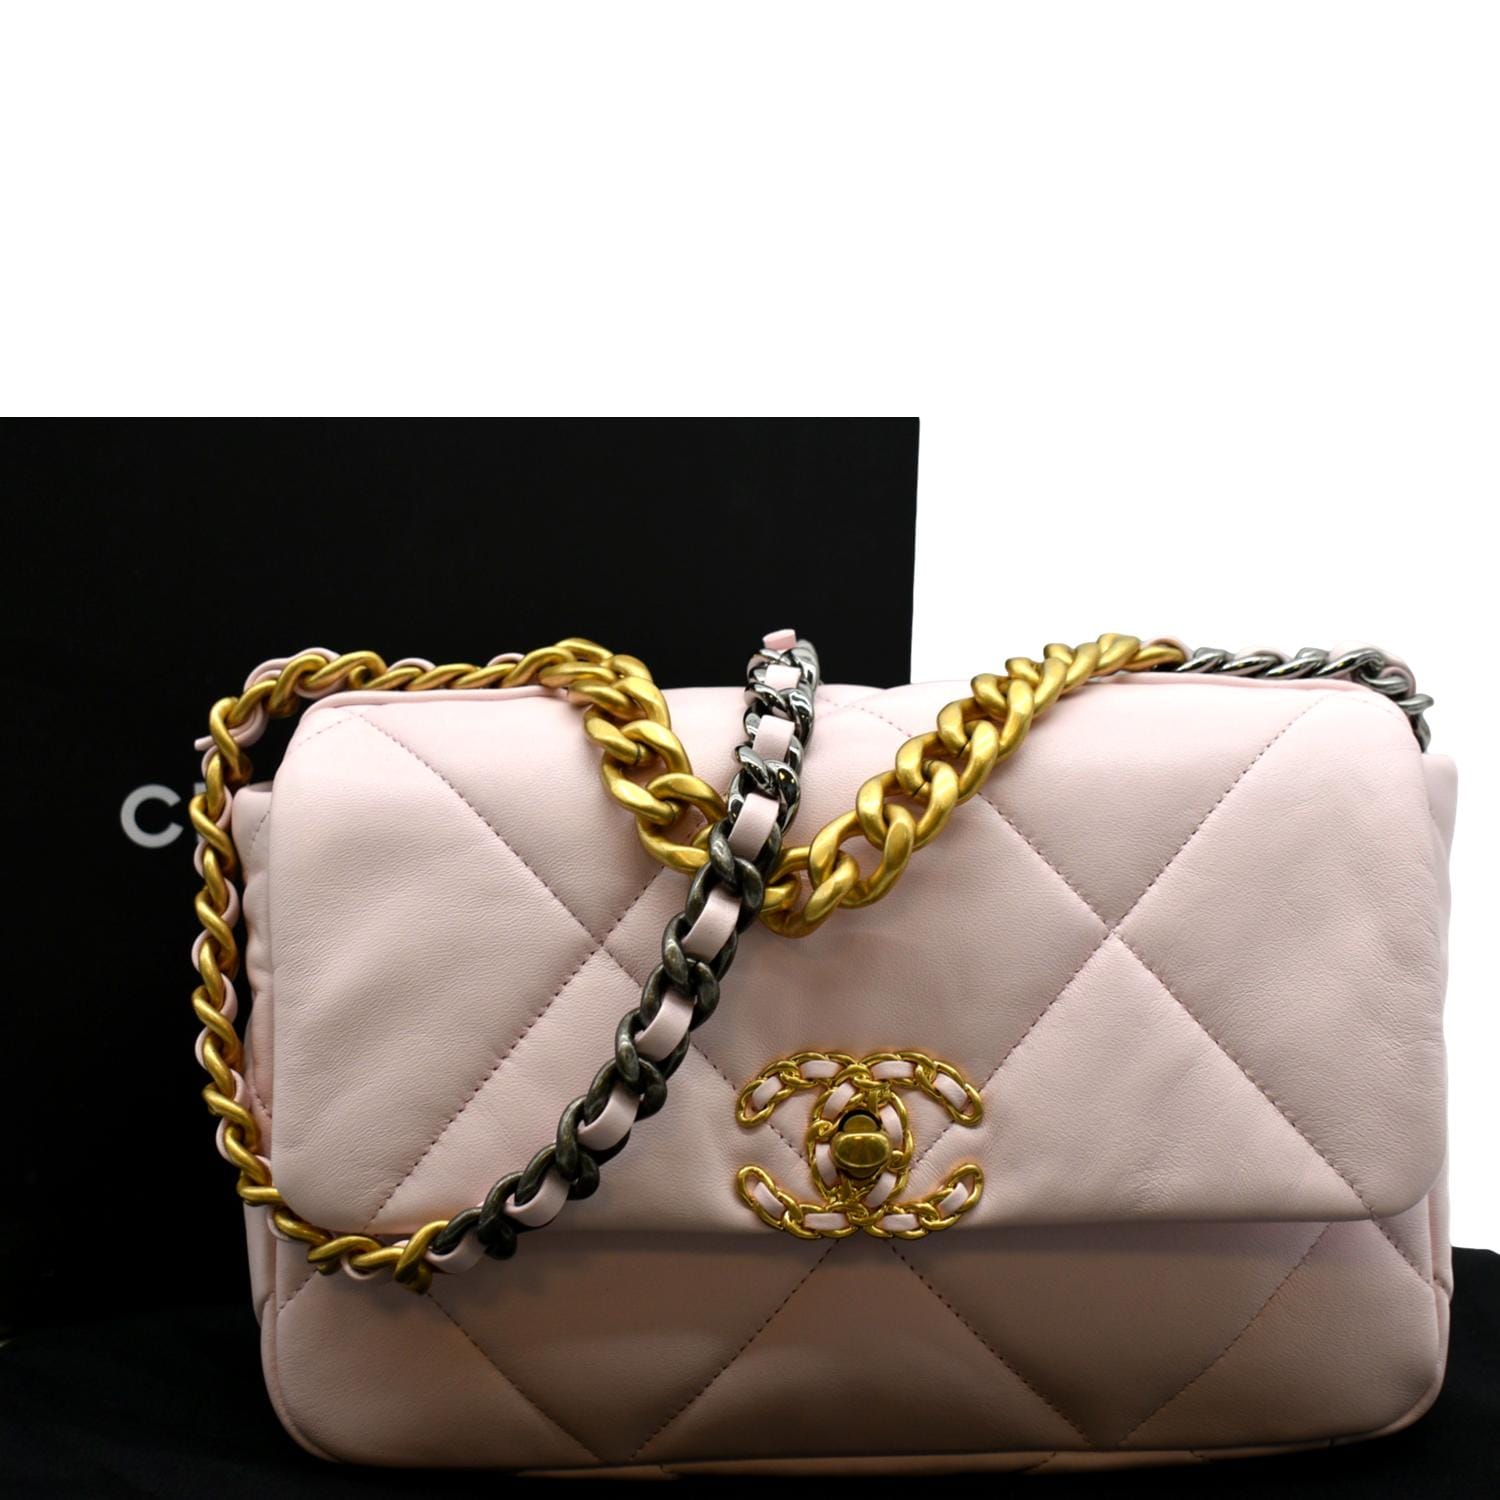 Chanel 19 leather handbag Chanel Pink in Leather - 33902755